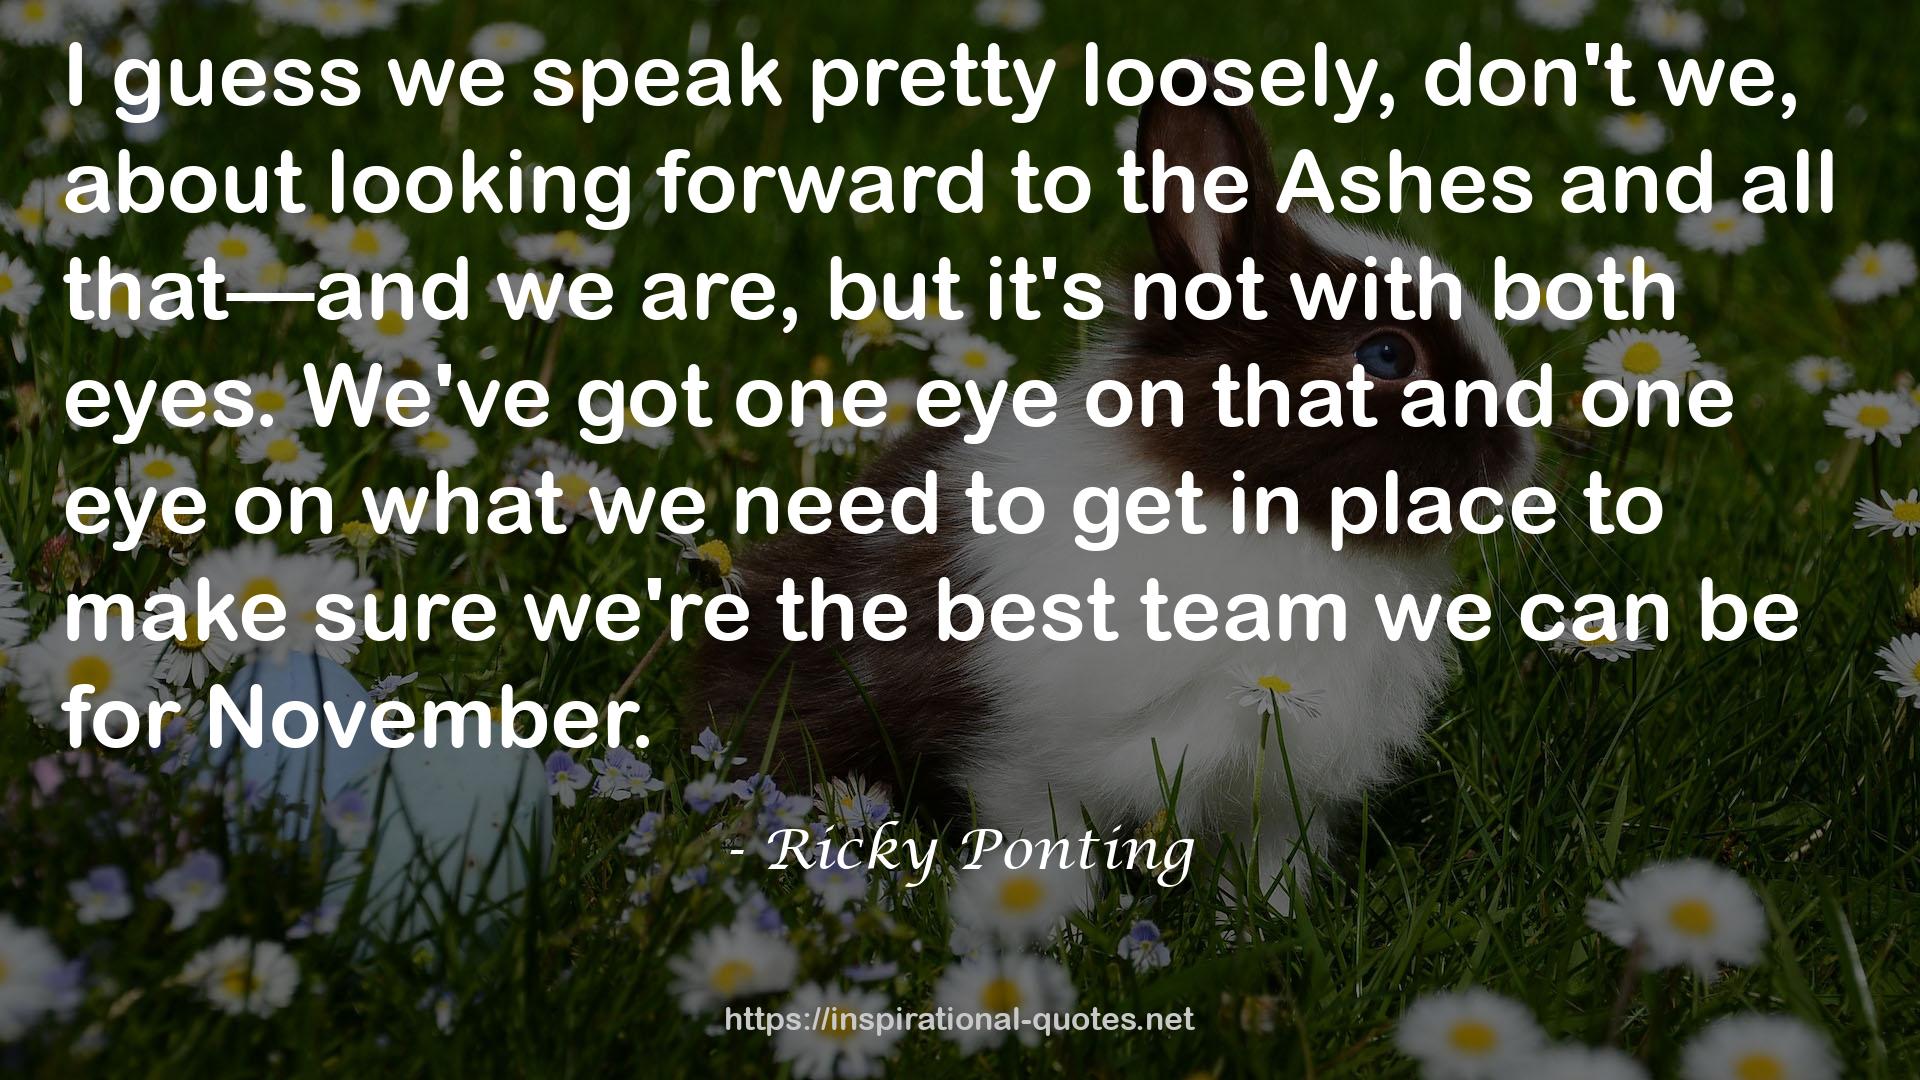 Ricky Ponting QUOTES